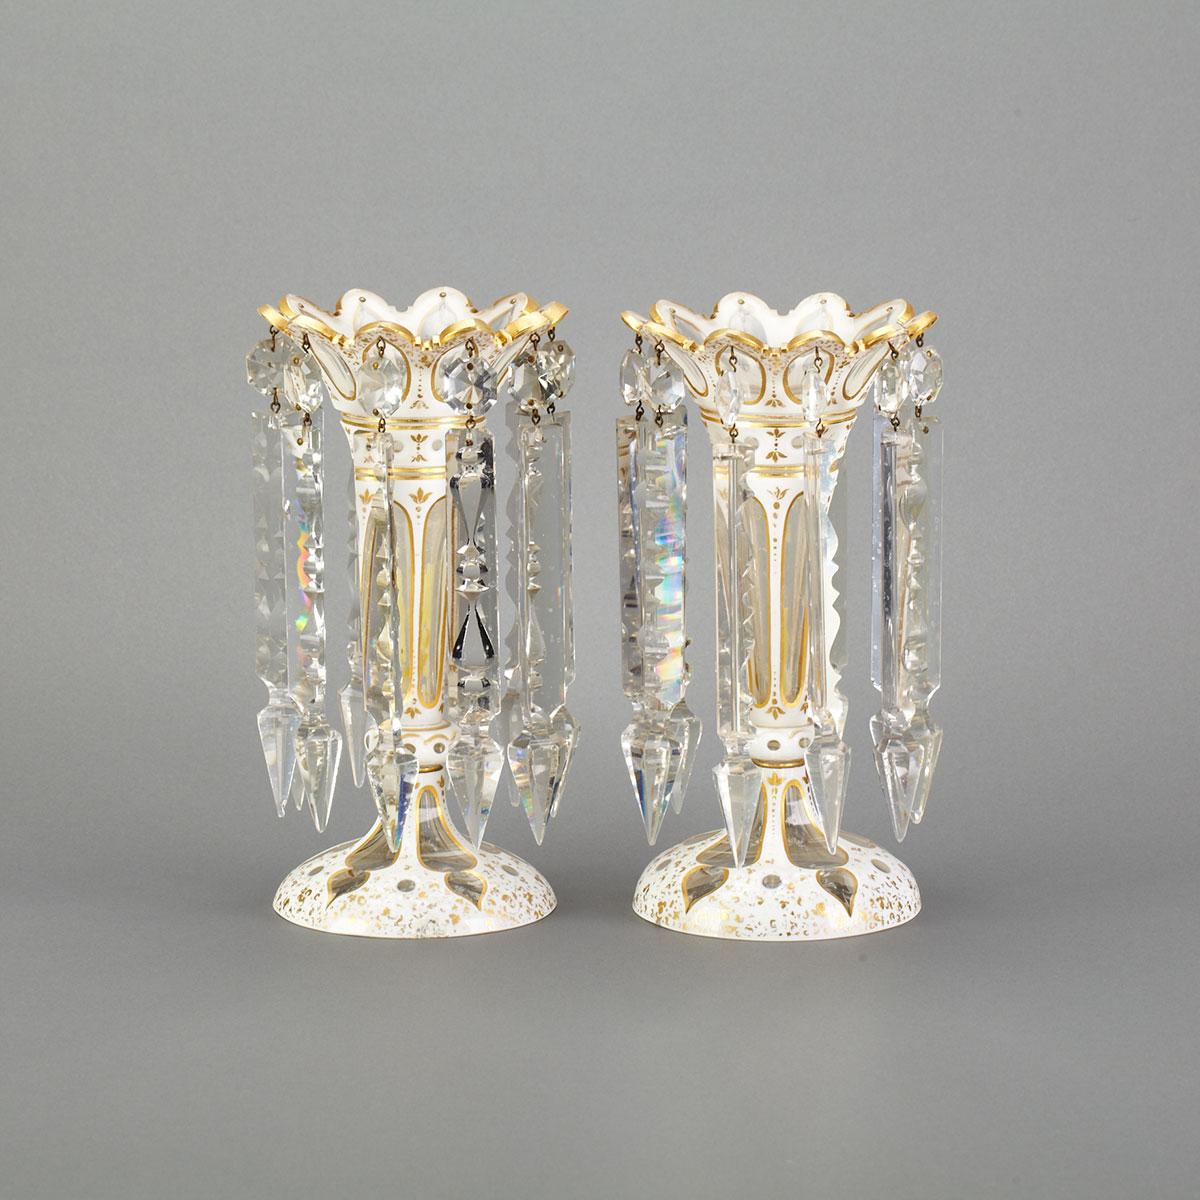 Pair of Bohemian Overlaid and Cut Glass Lustres, late 19th century